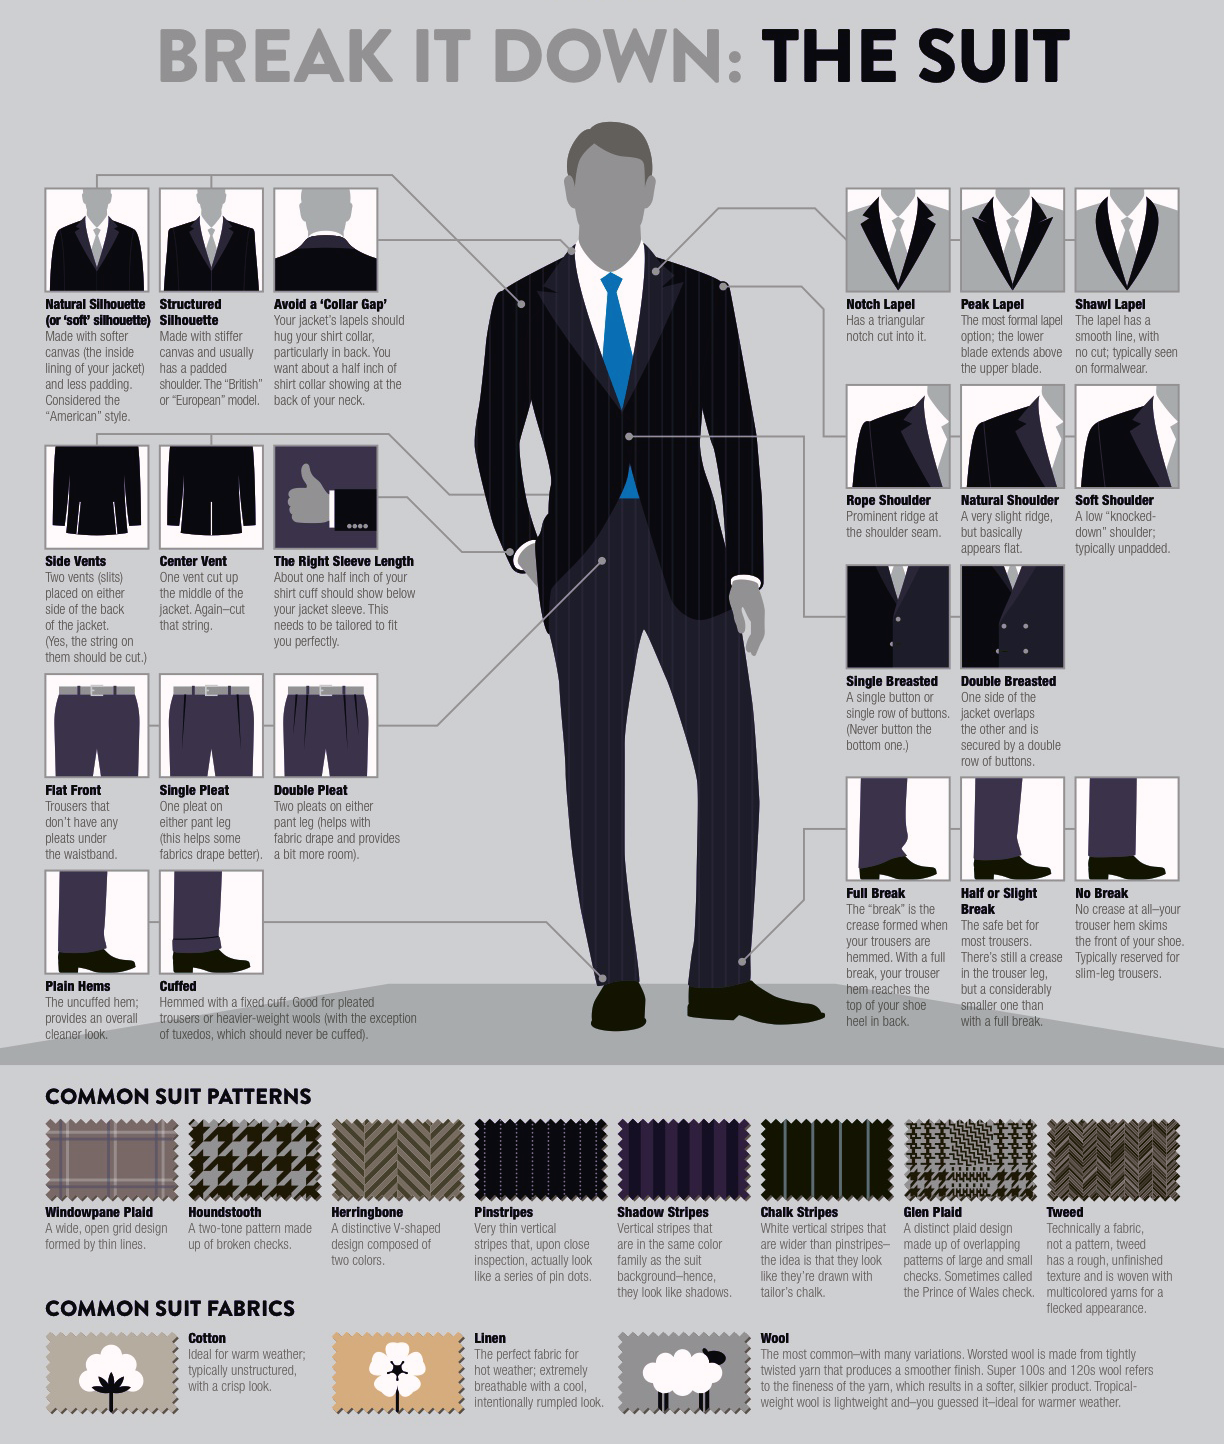 Everything You Need To Know About Wearing A Suit! – MR TIE GUY - For ...